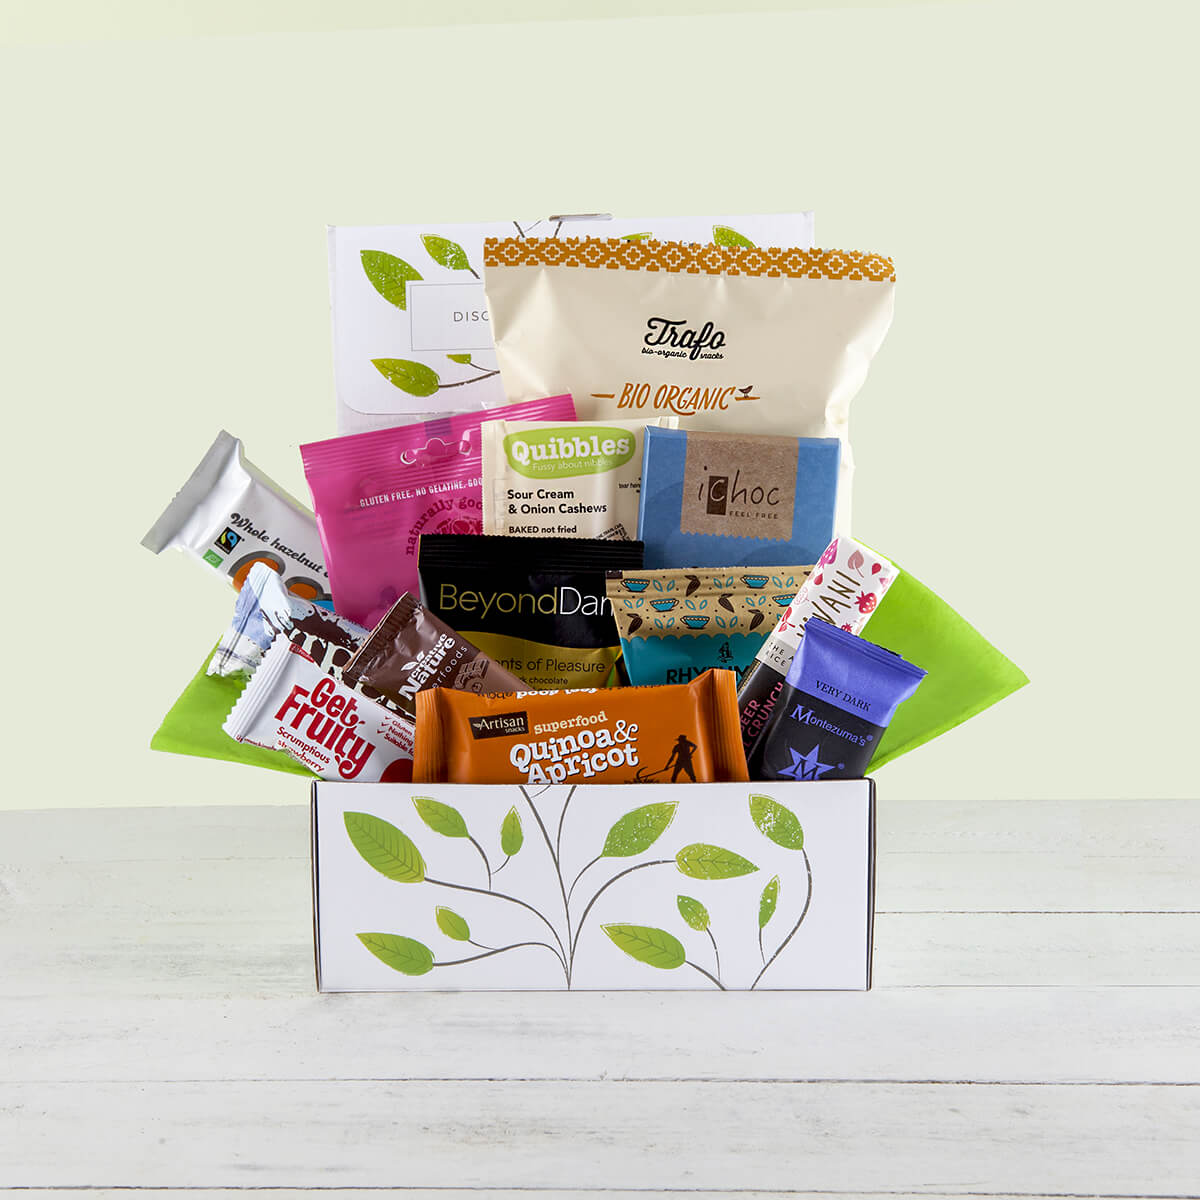 Win a Vegan Chocolate and Snack Gift Box